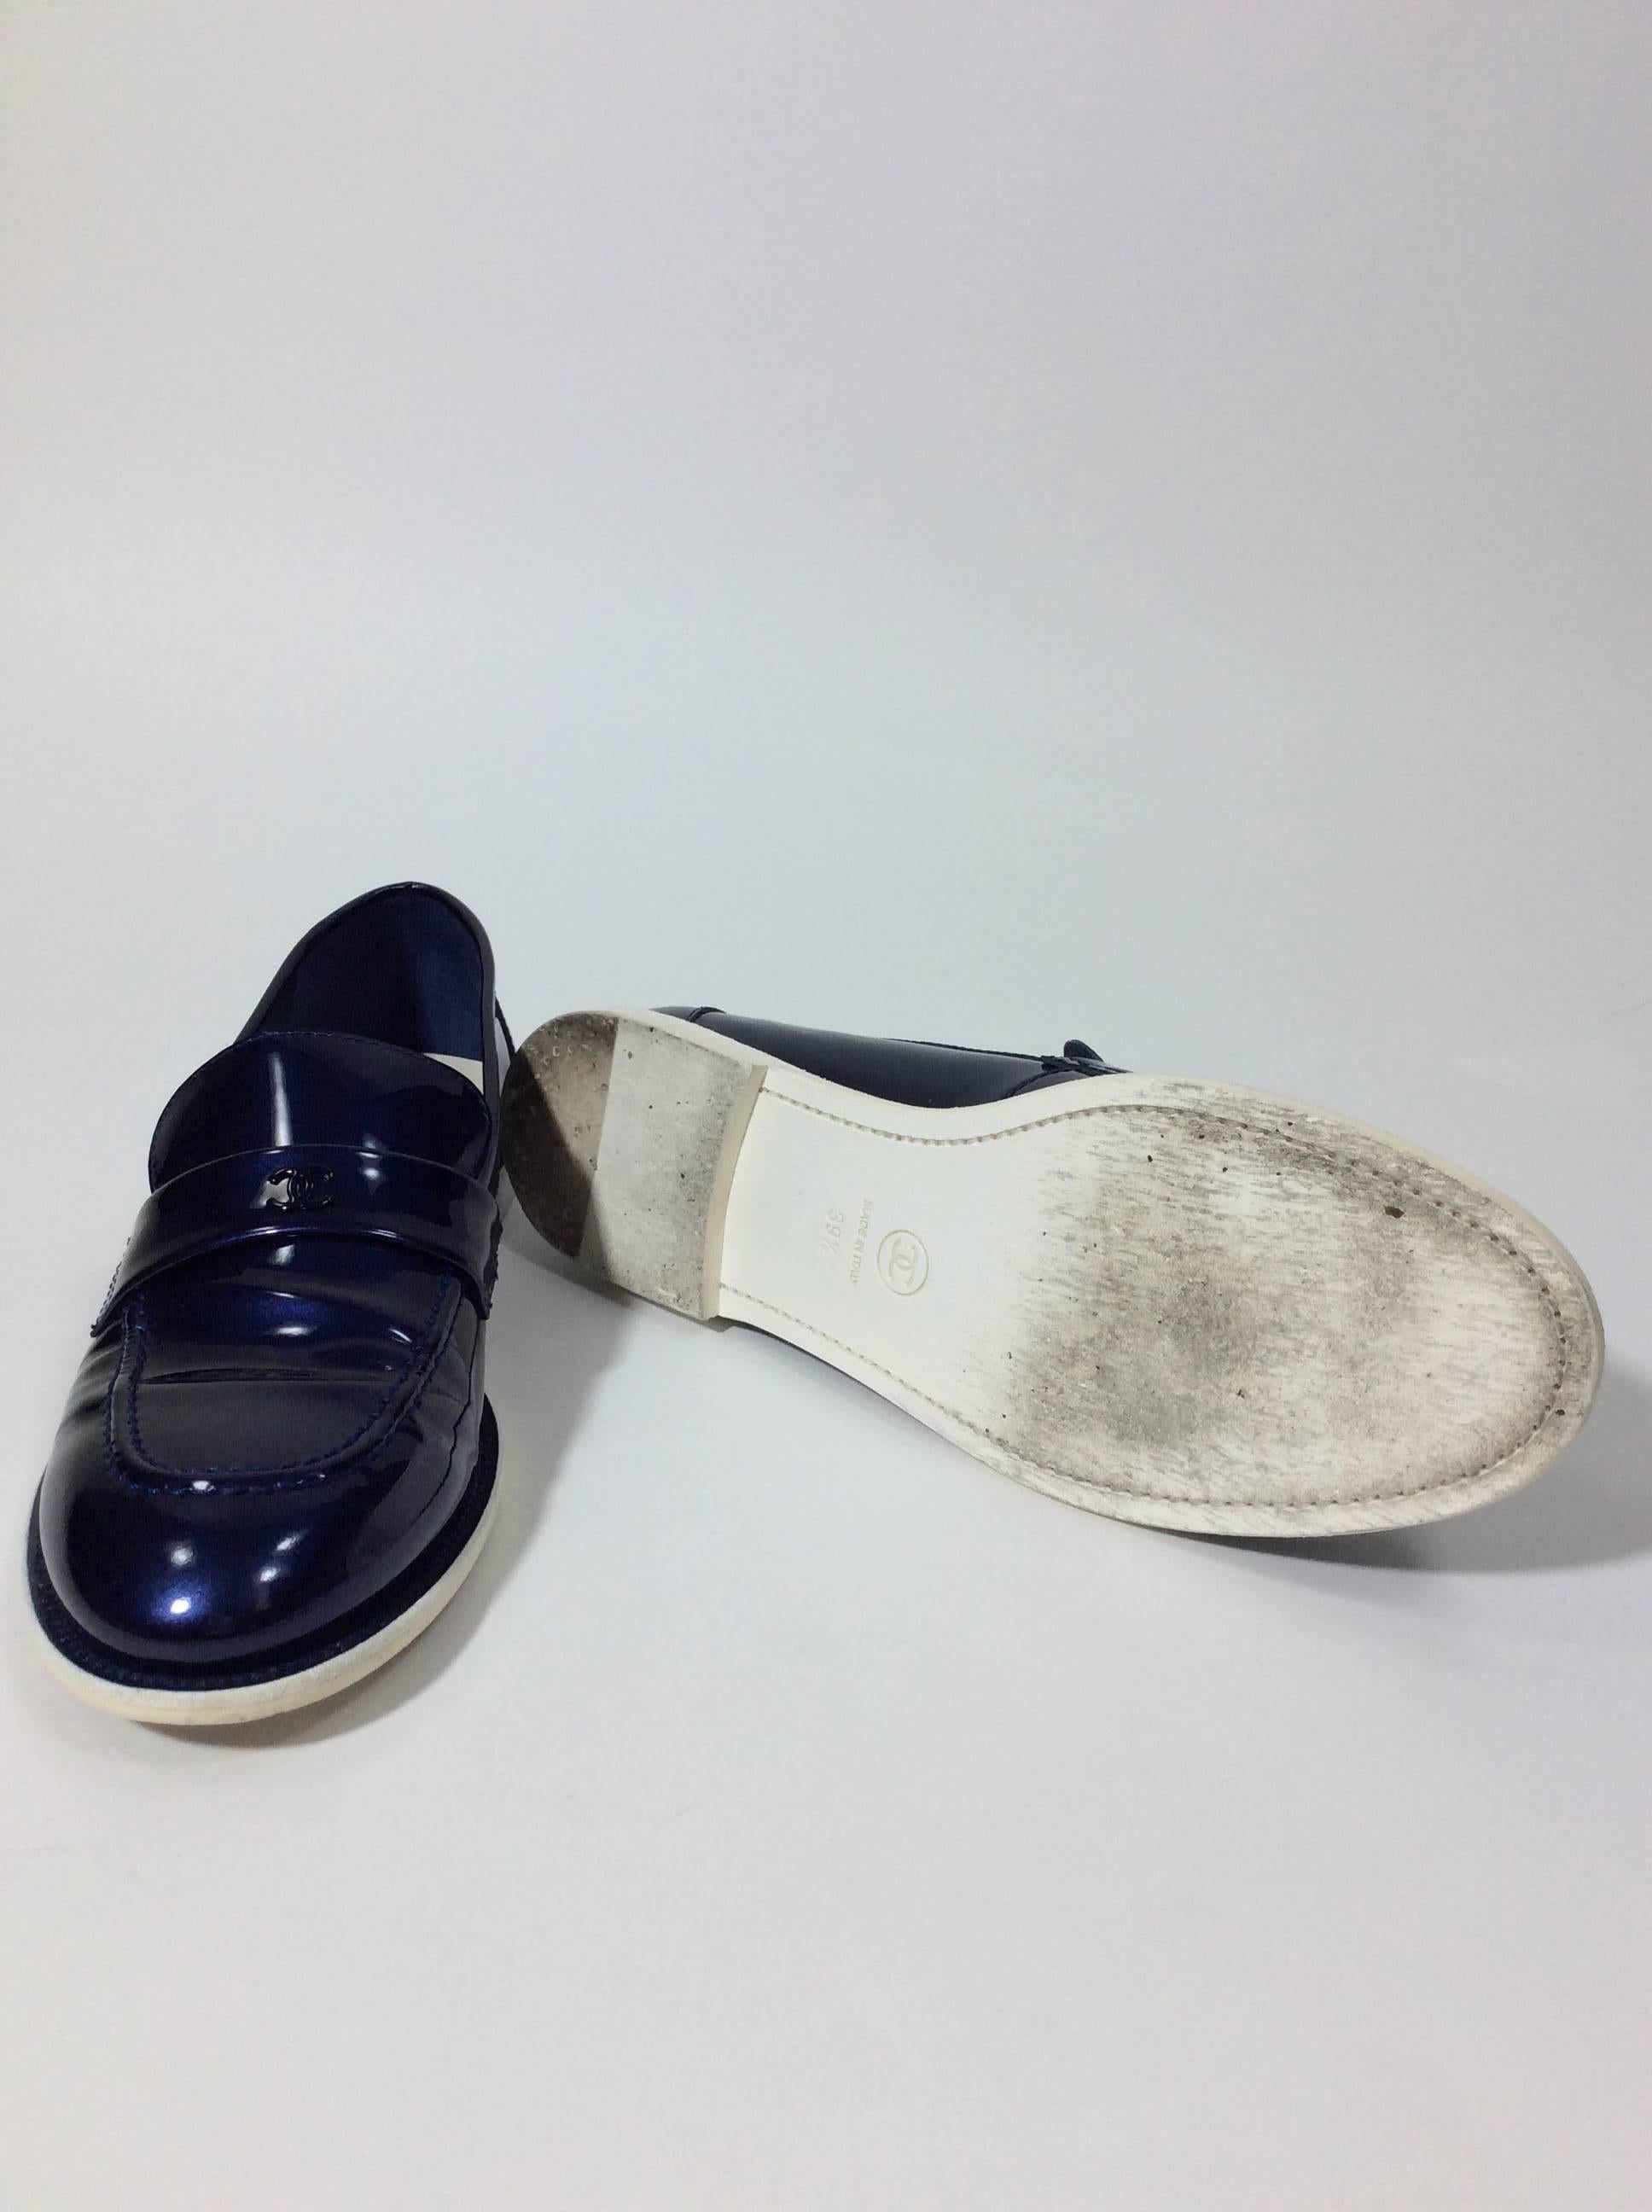 Chanel Patent Leather Midnight Blue Loafer Shoe For Sale 1